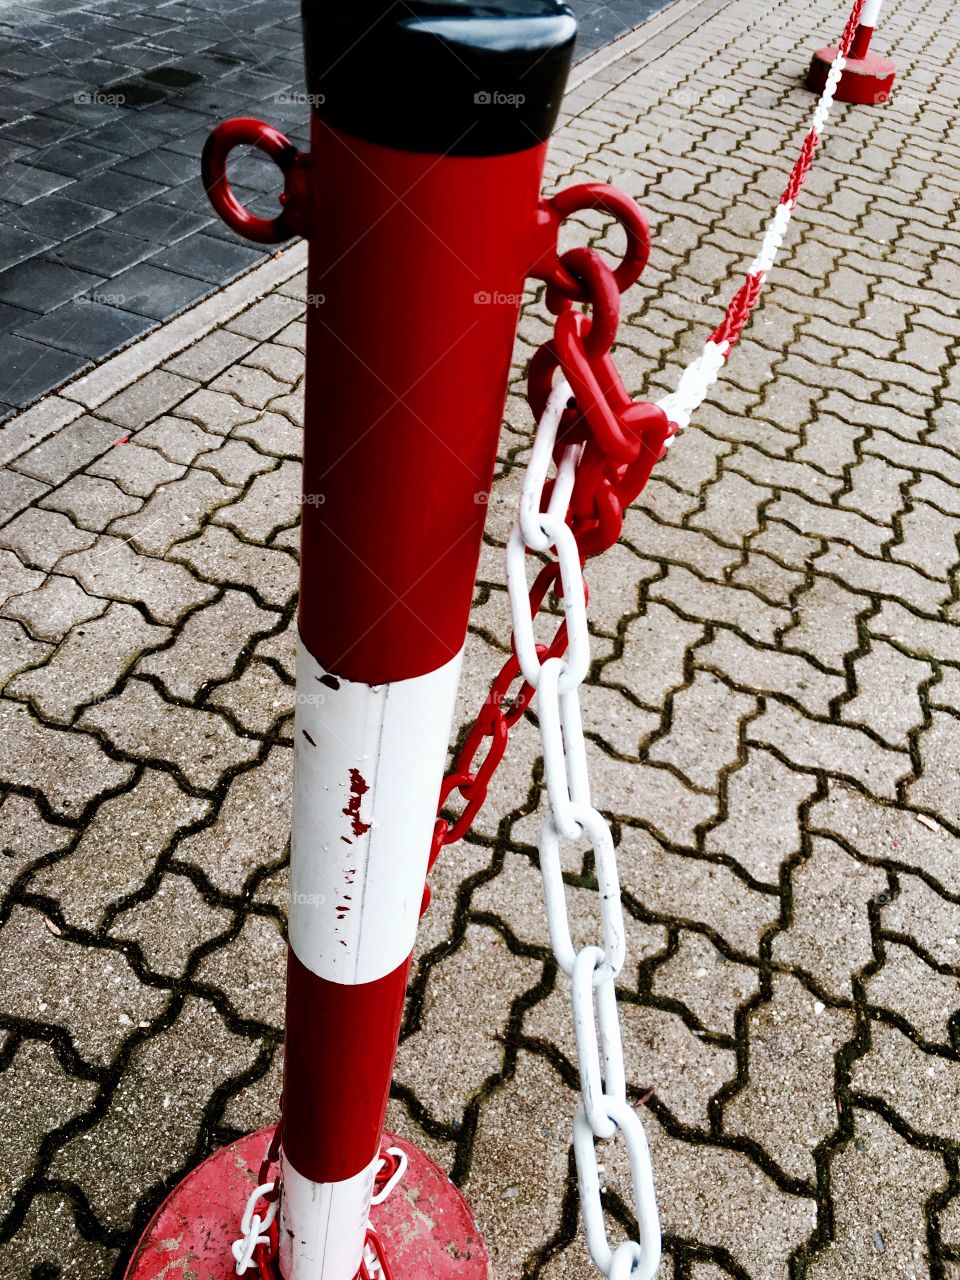 Pole on Chains